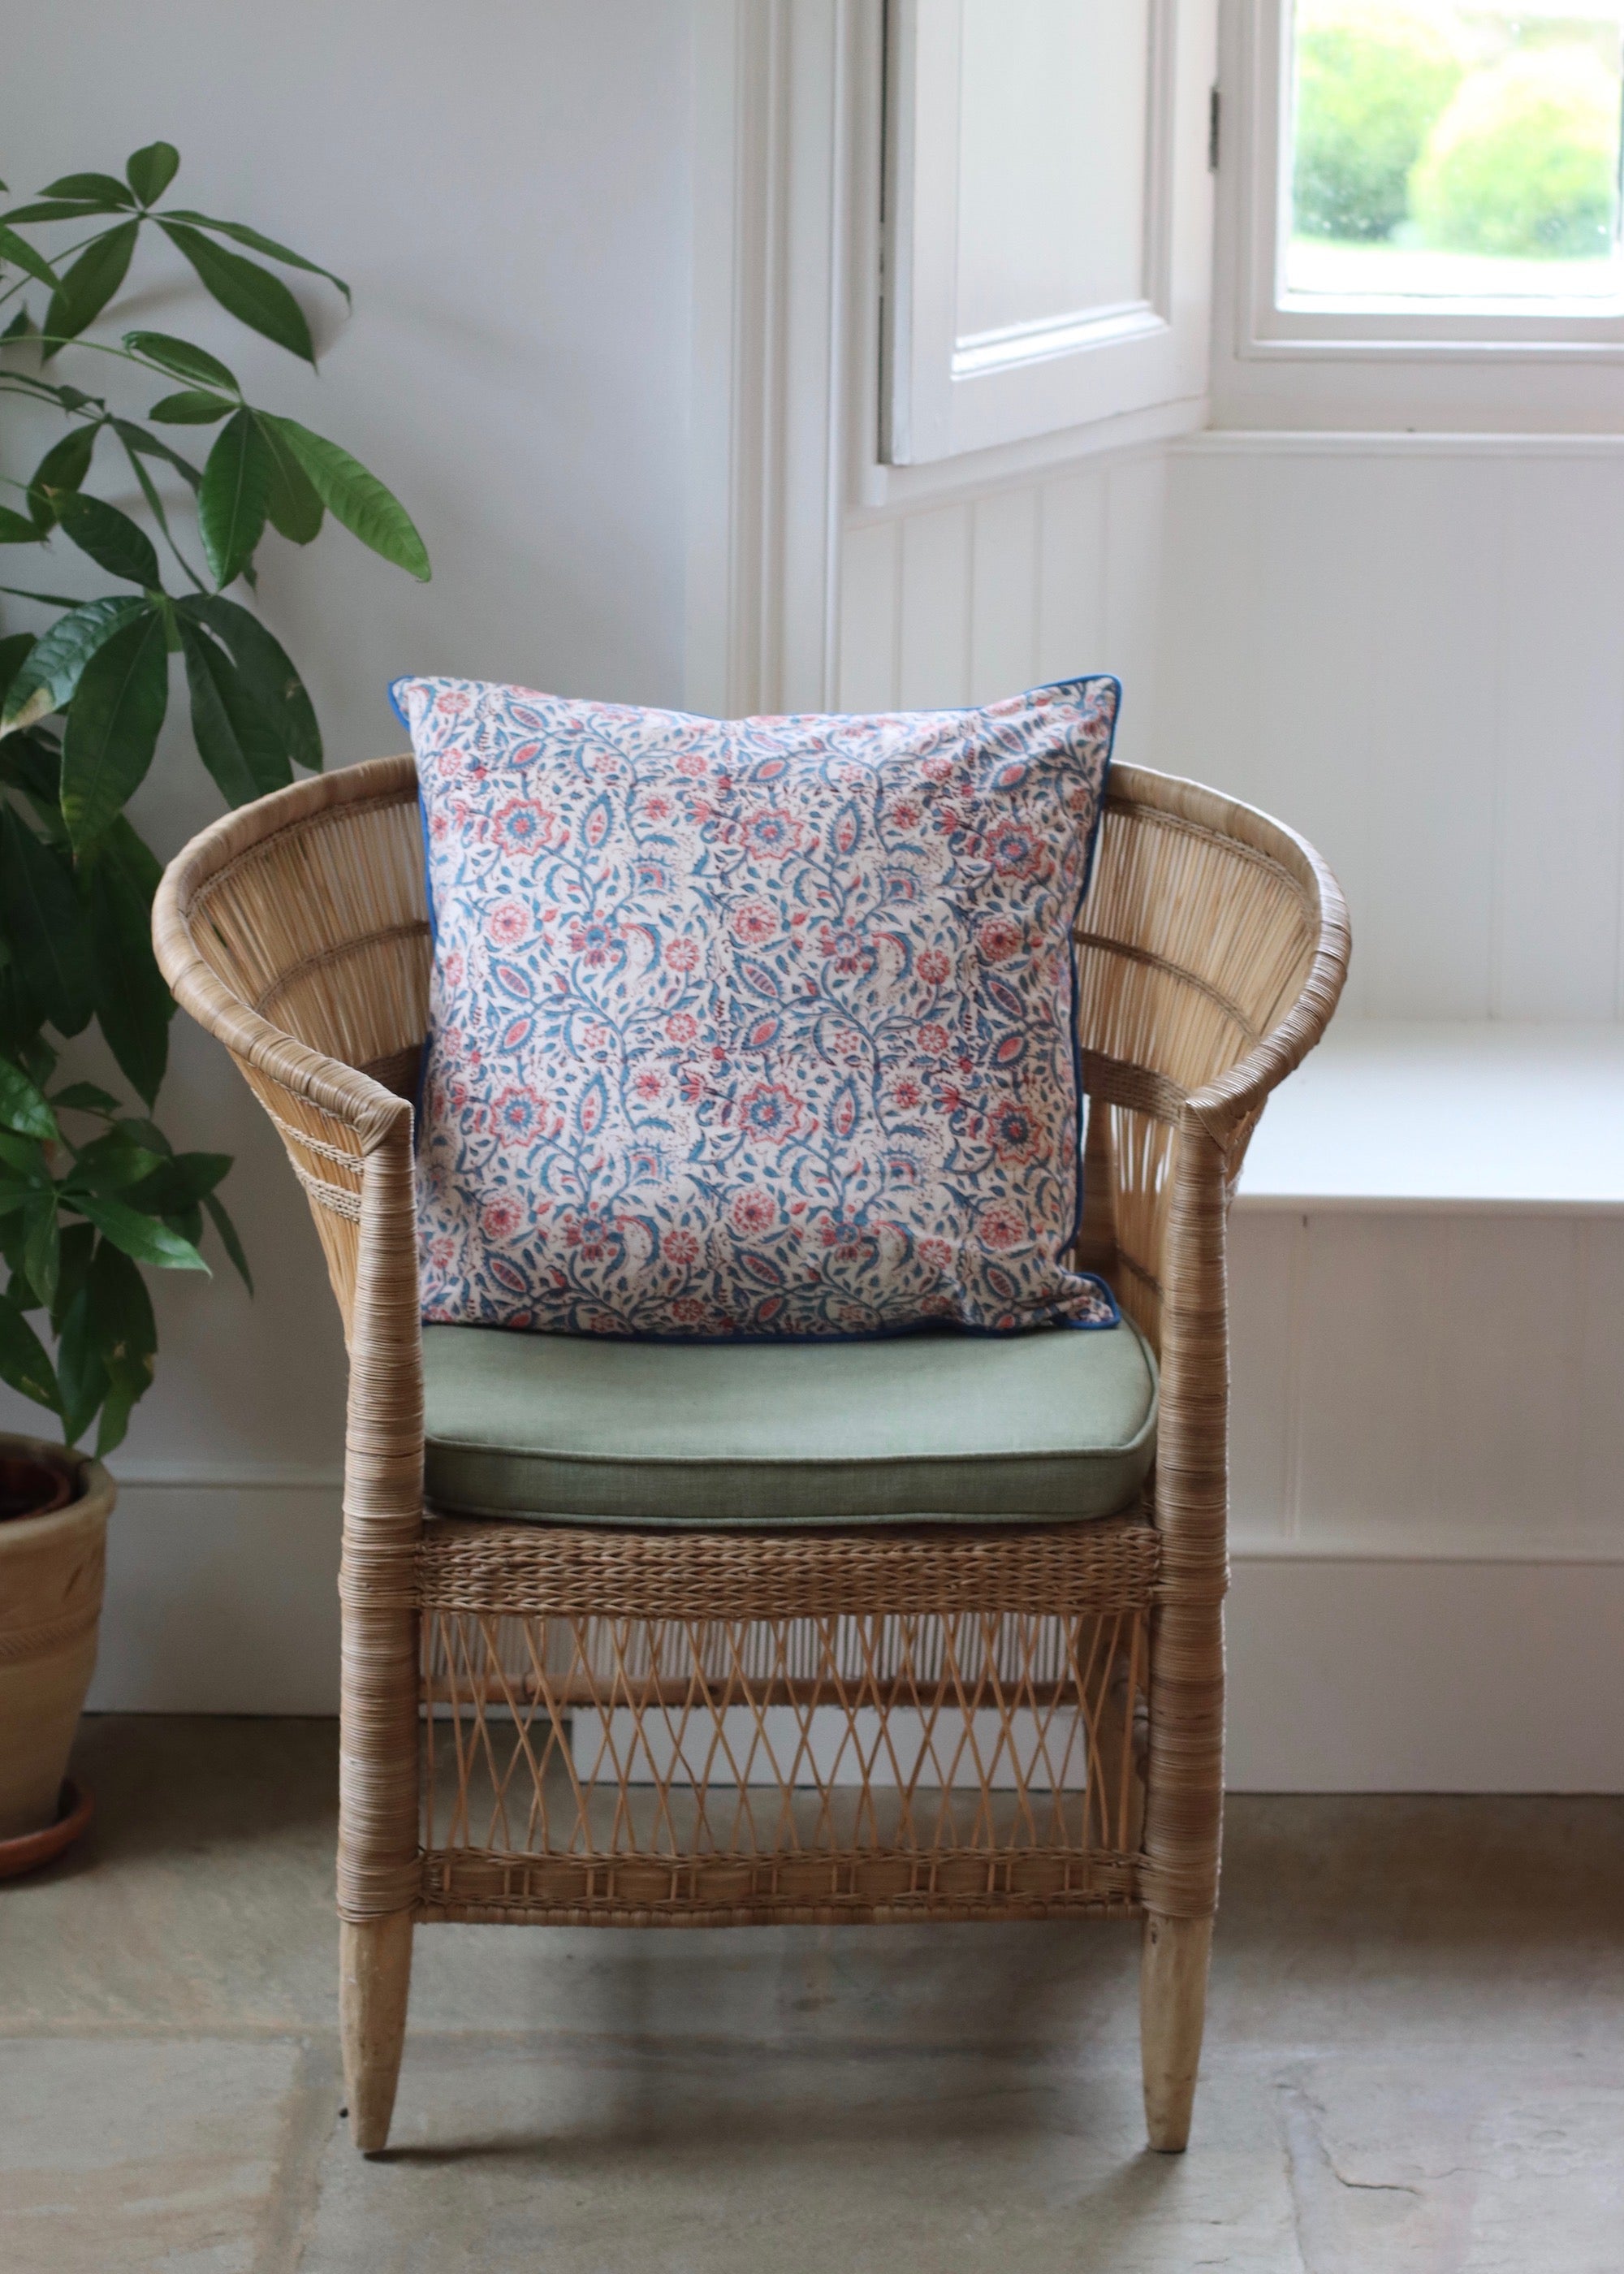 Block Print Cushion Cover - White with Pink and Blue